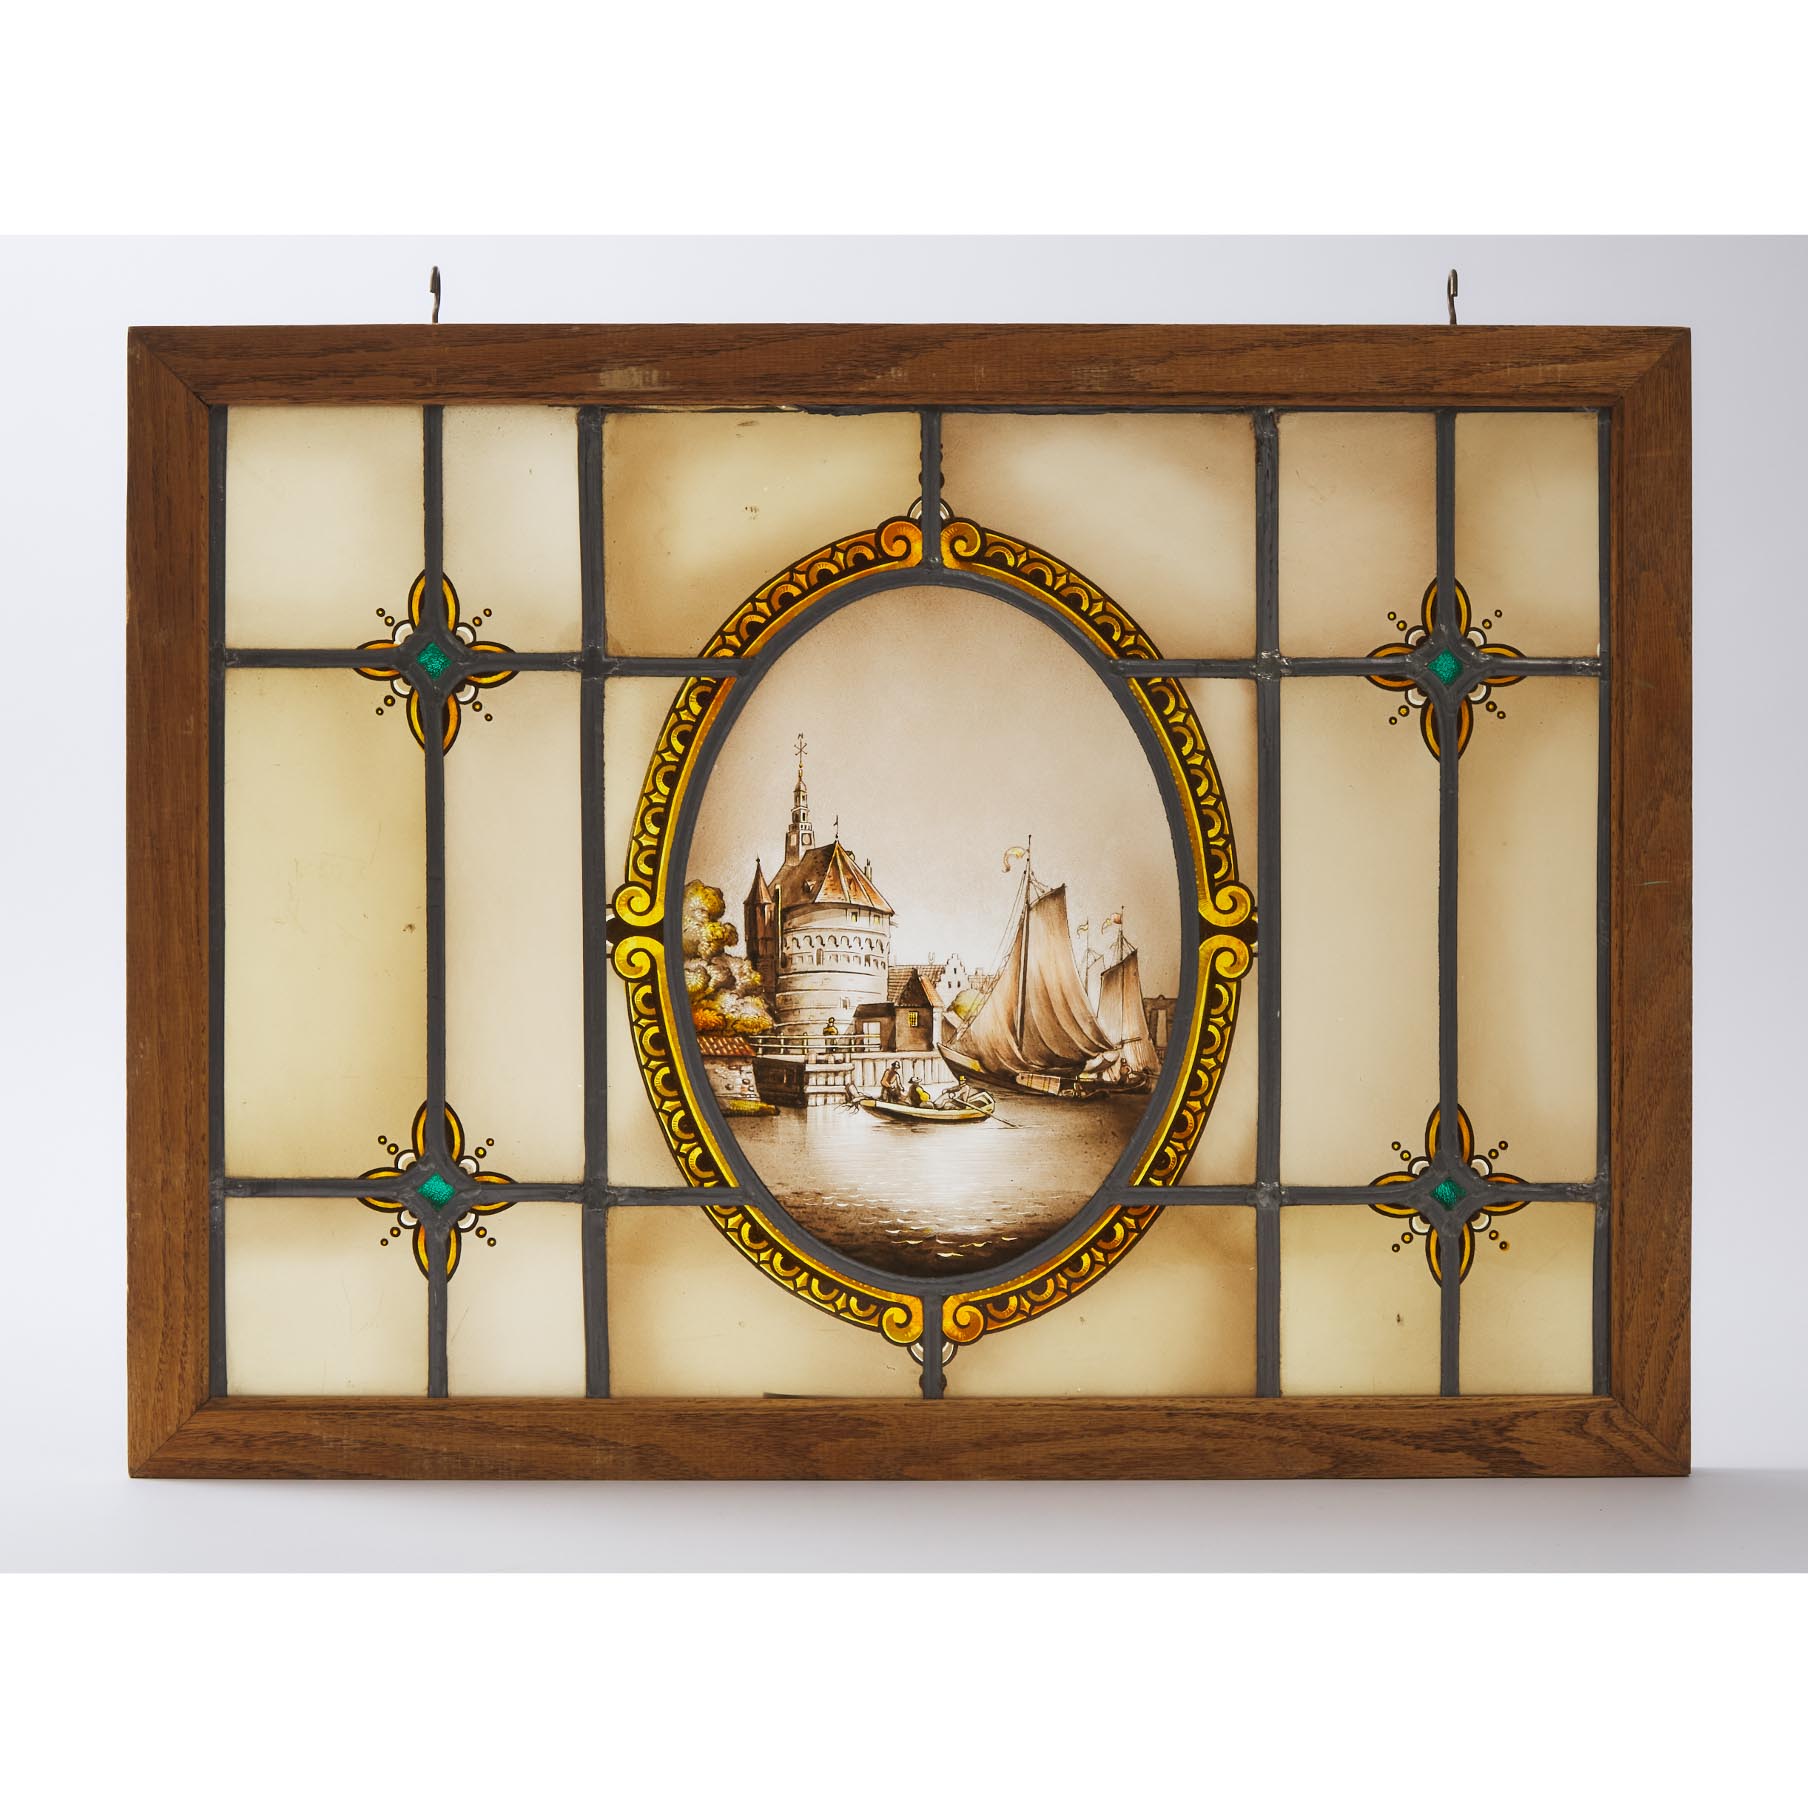 Pair of Victorian Stained Glass Windows, 19th century